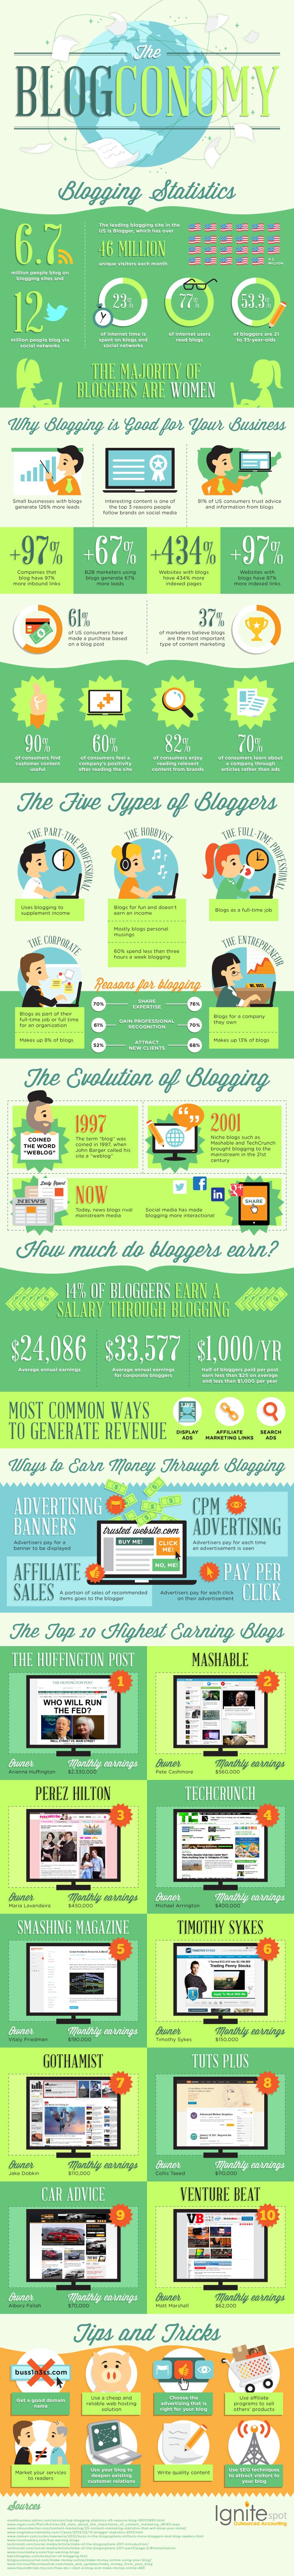 Why Blogging Is The Best Marketing Tool You Will Find [Infographic]